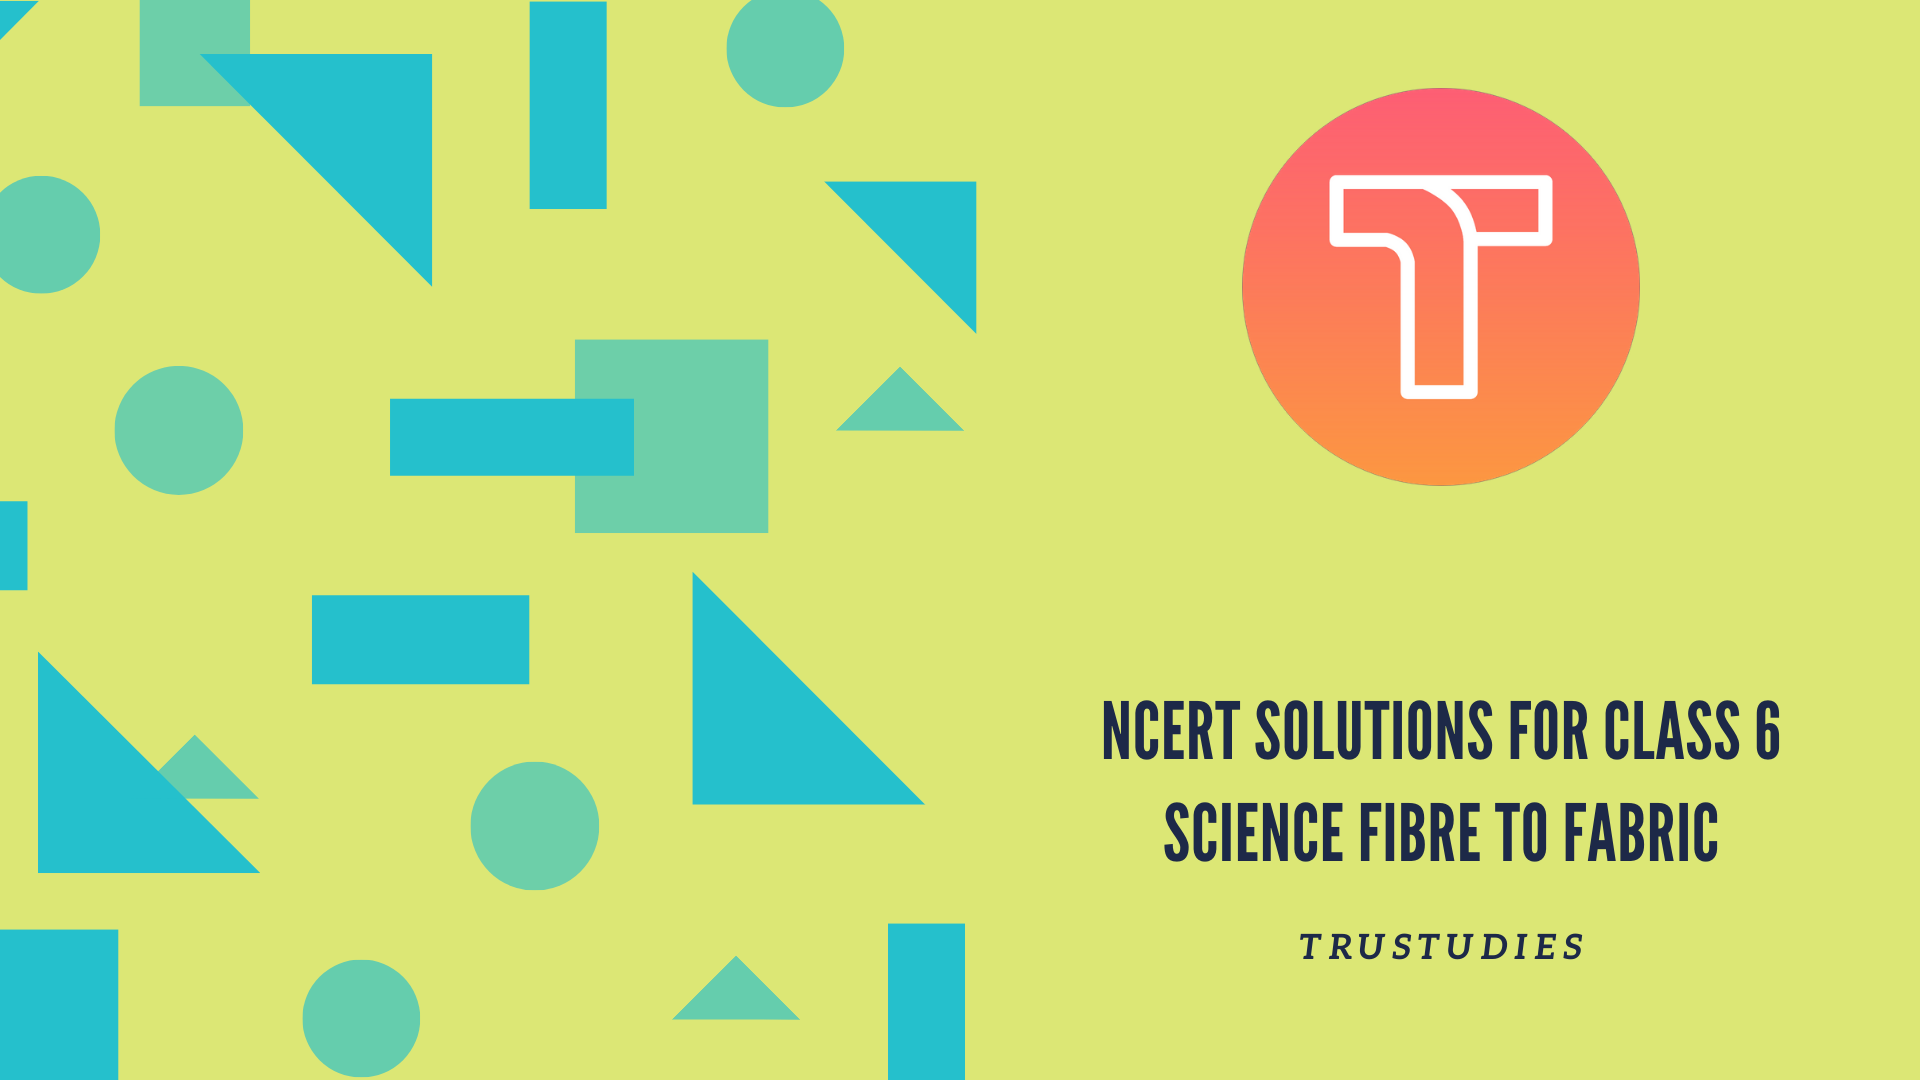 NCERT solutions for class 6 science chapter 3 fibre to fabric banner image